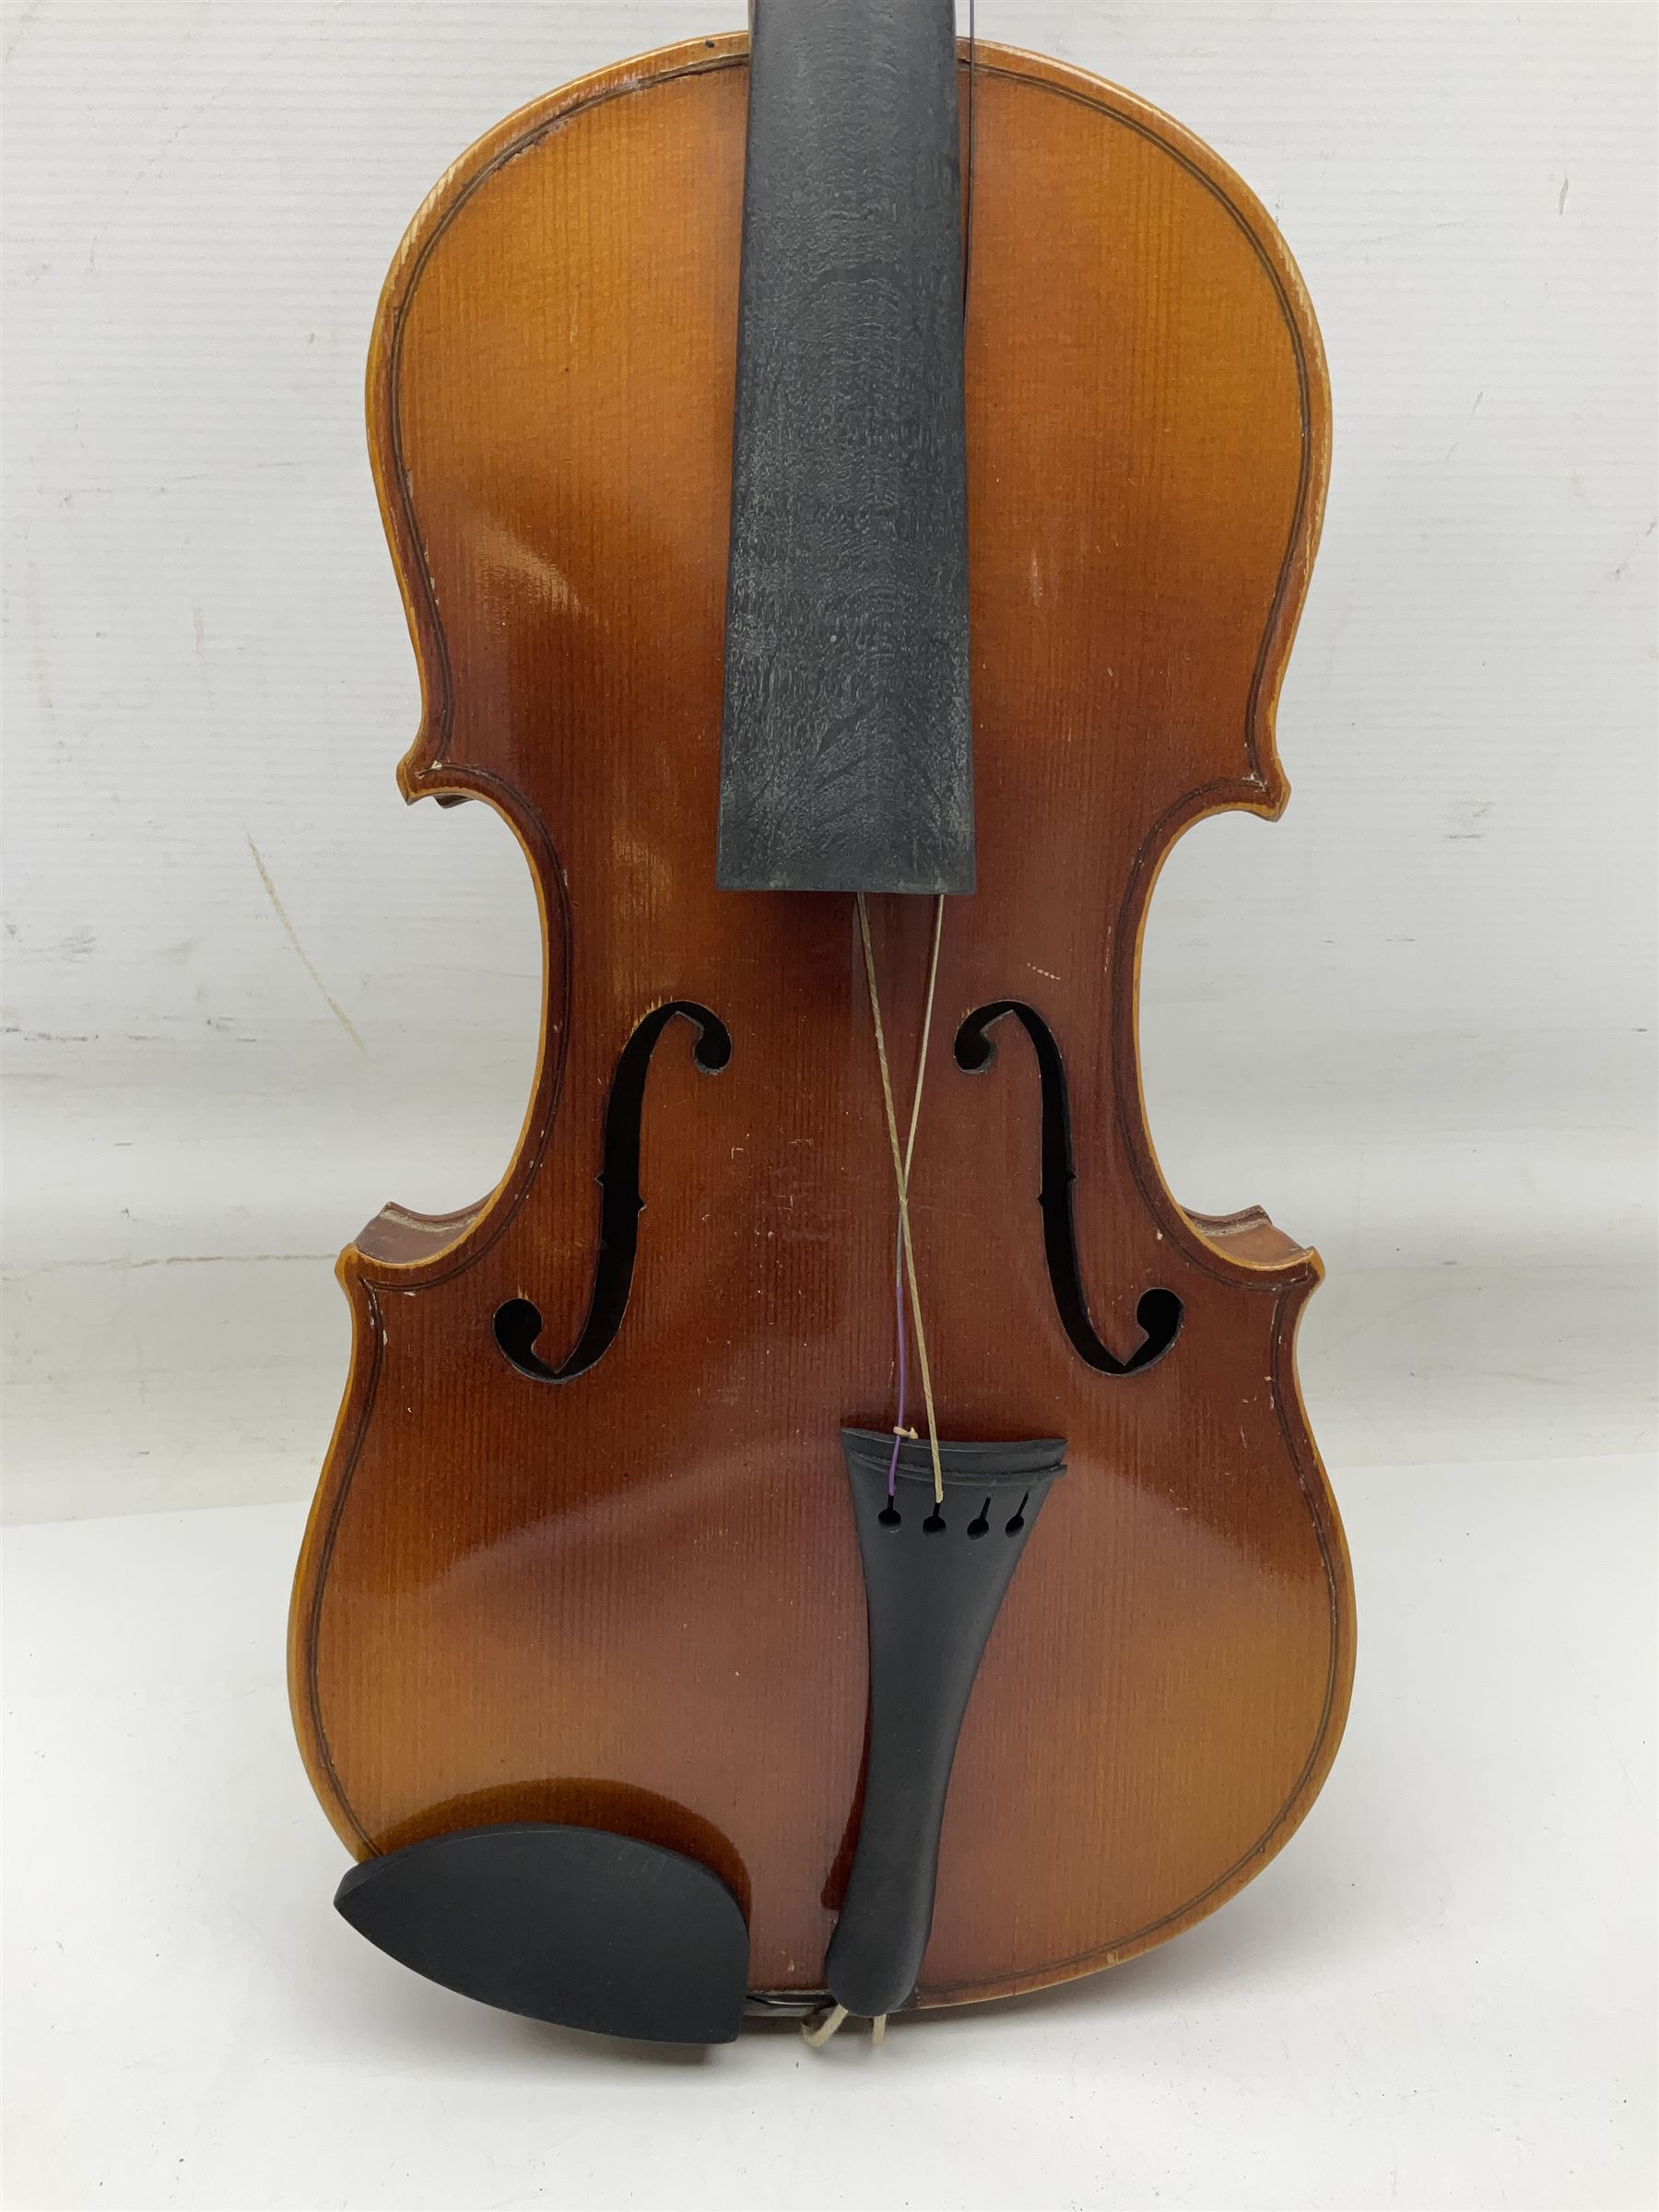 Czechoslovakian violin c1920 with 36cm two-piece maple back and ribs and spruce top - Image 5 of 34